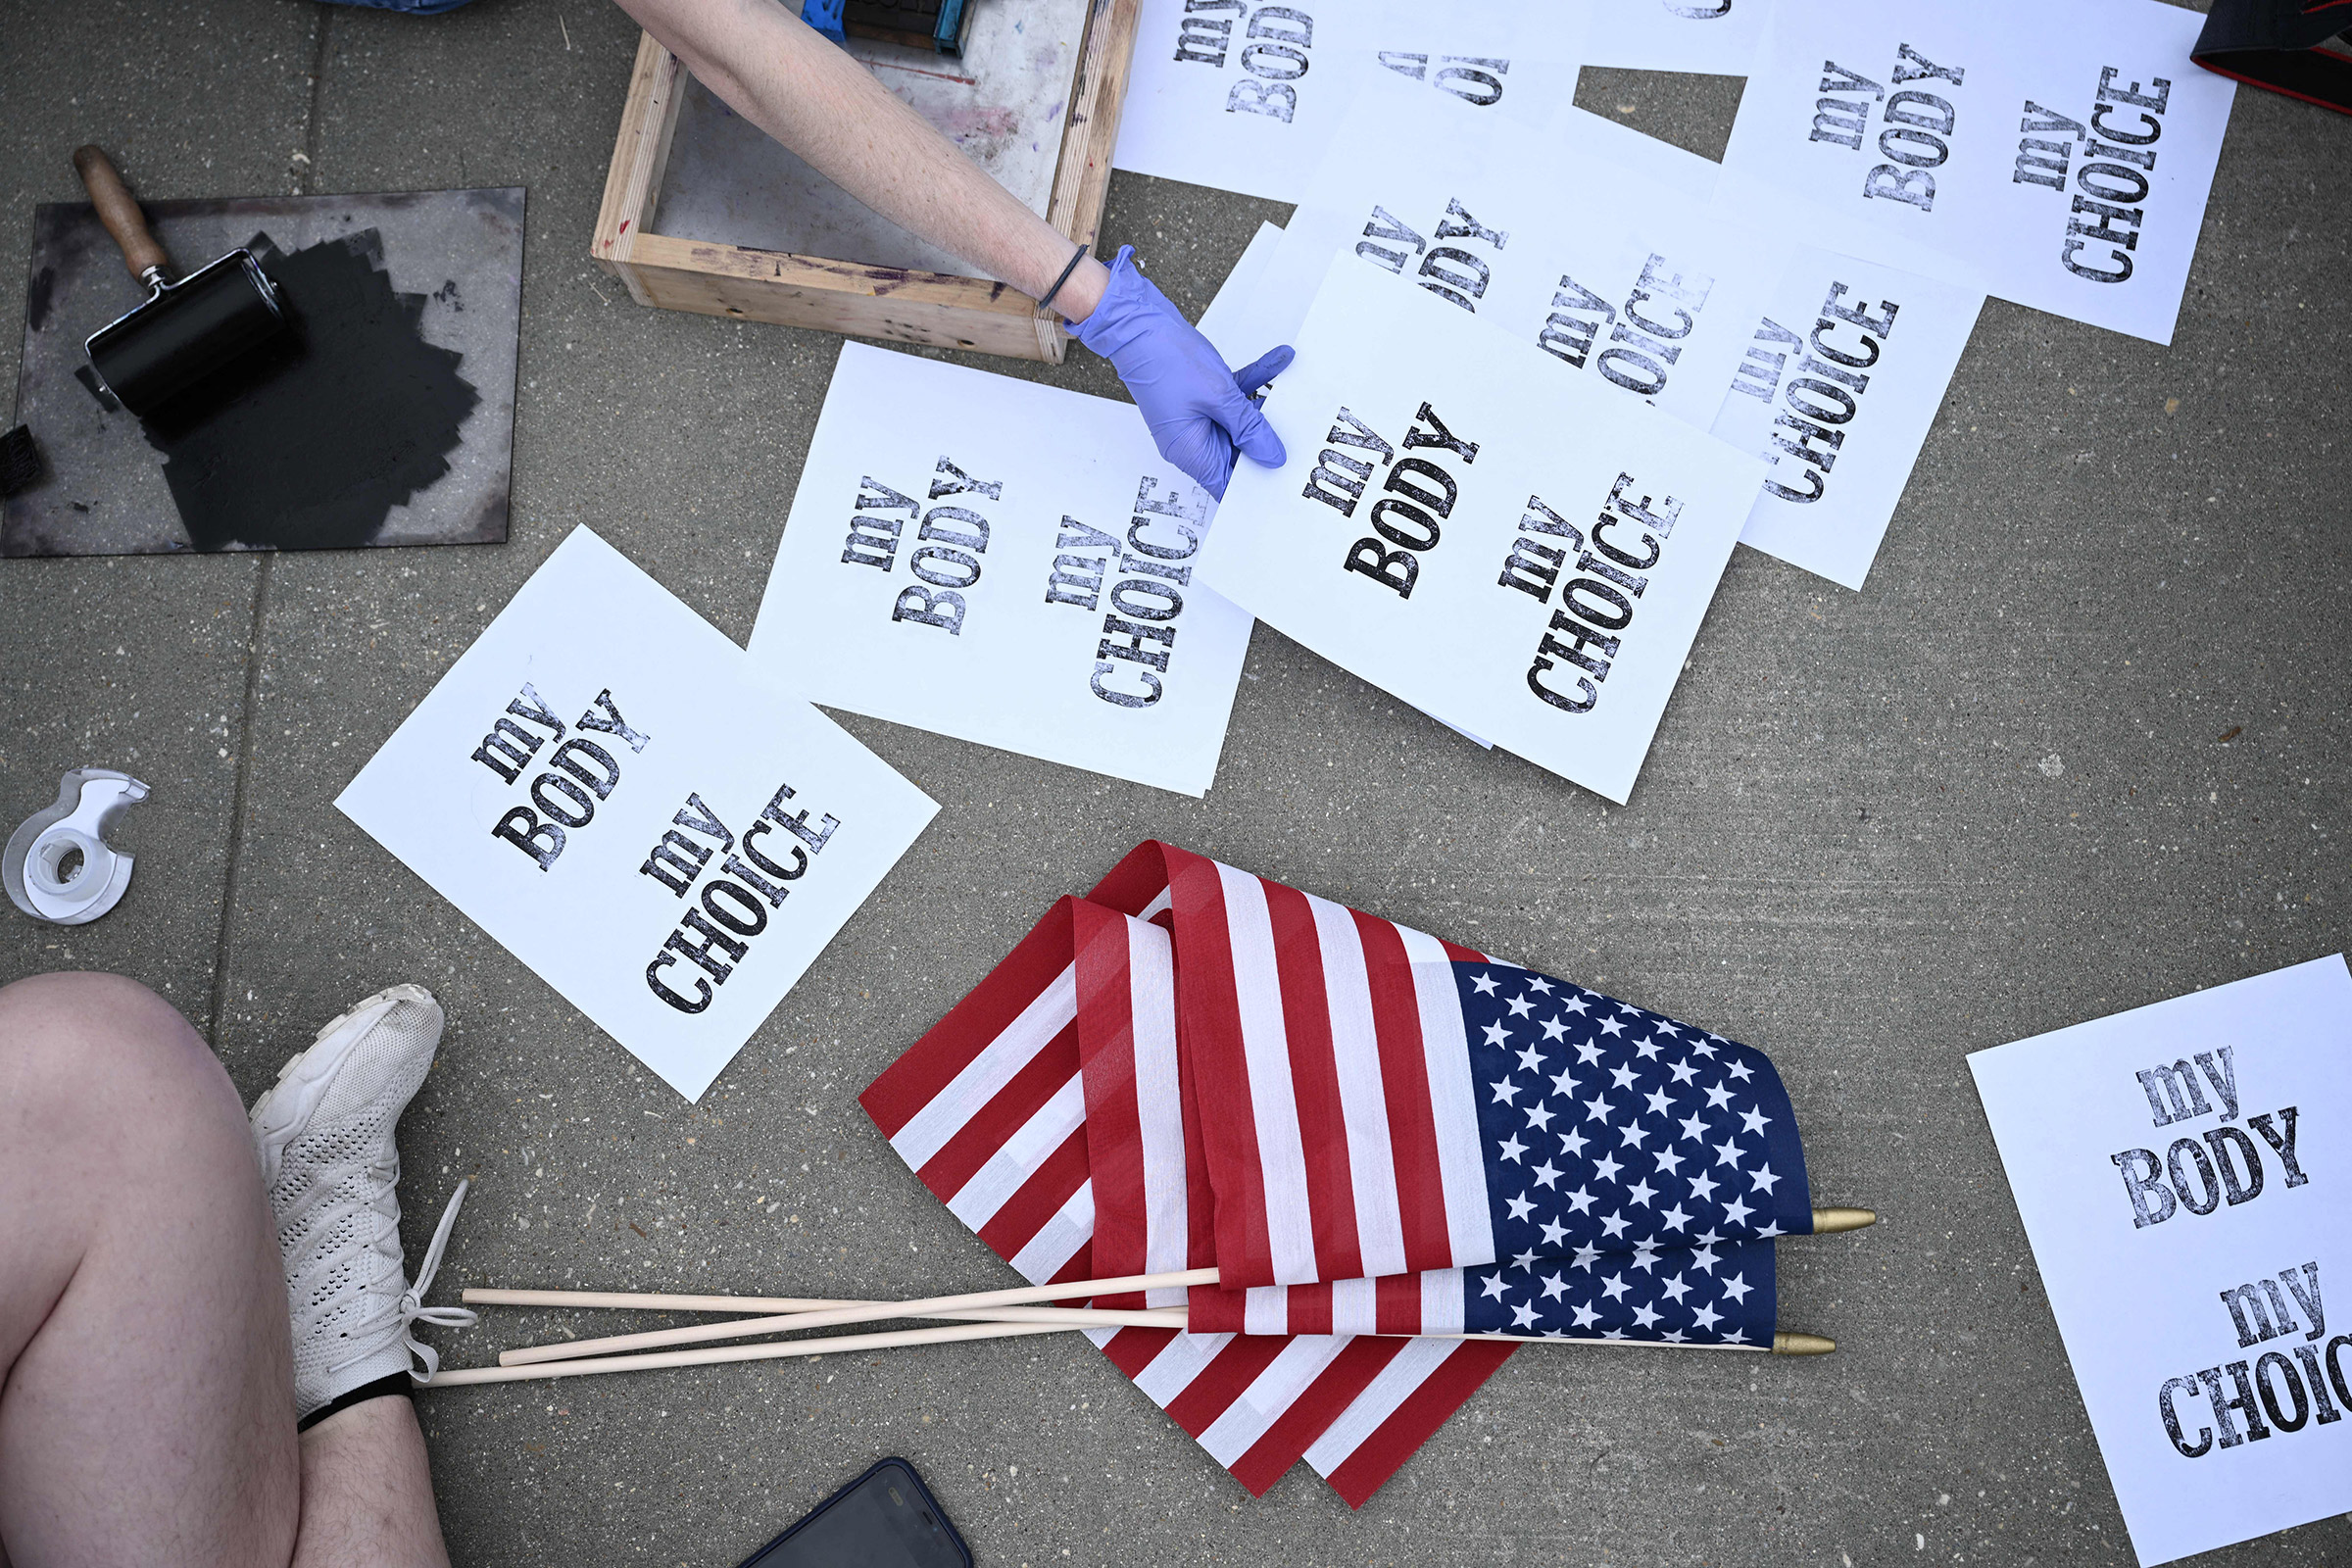 Pro-choice demonstrators make signs in front of the US Supreme Court in Washington, DC, on May 3, 2022.